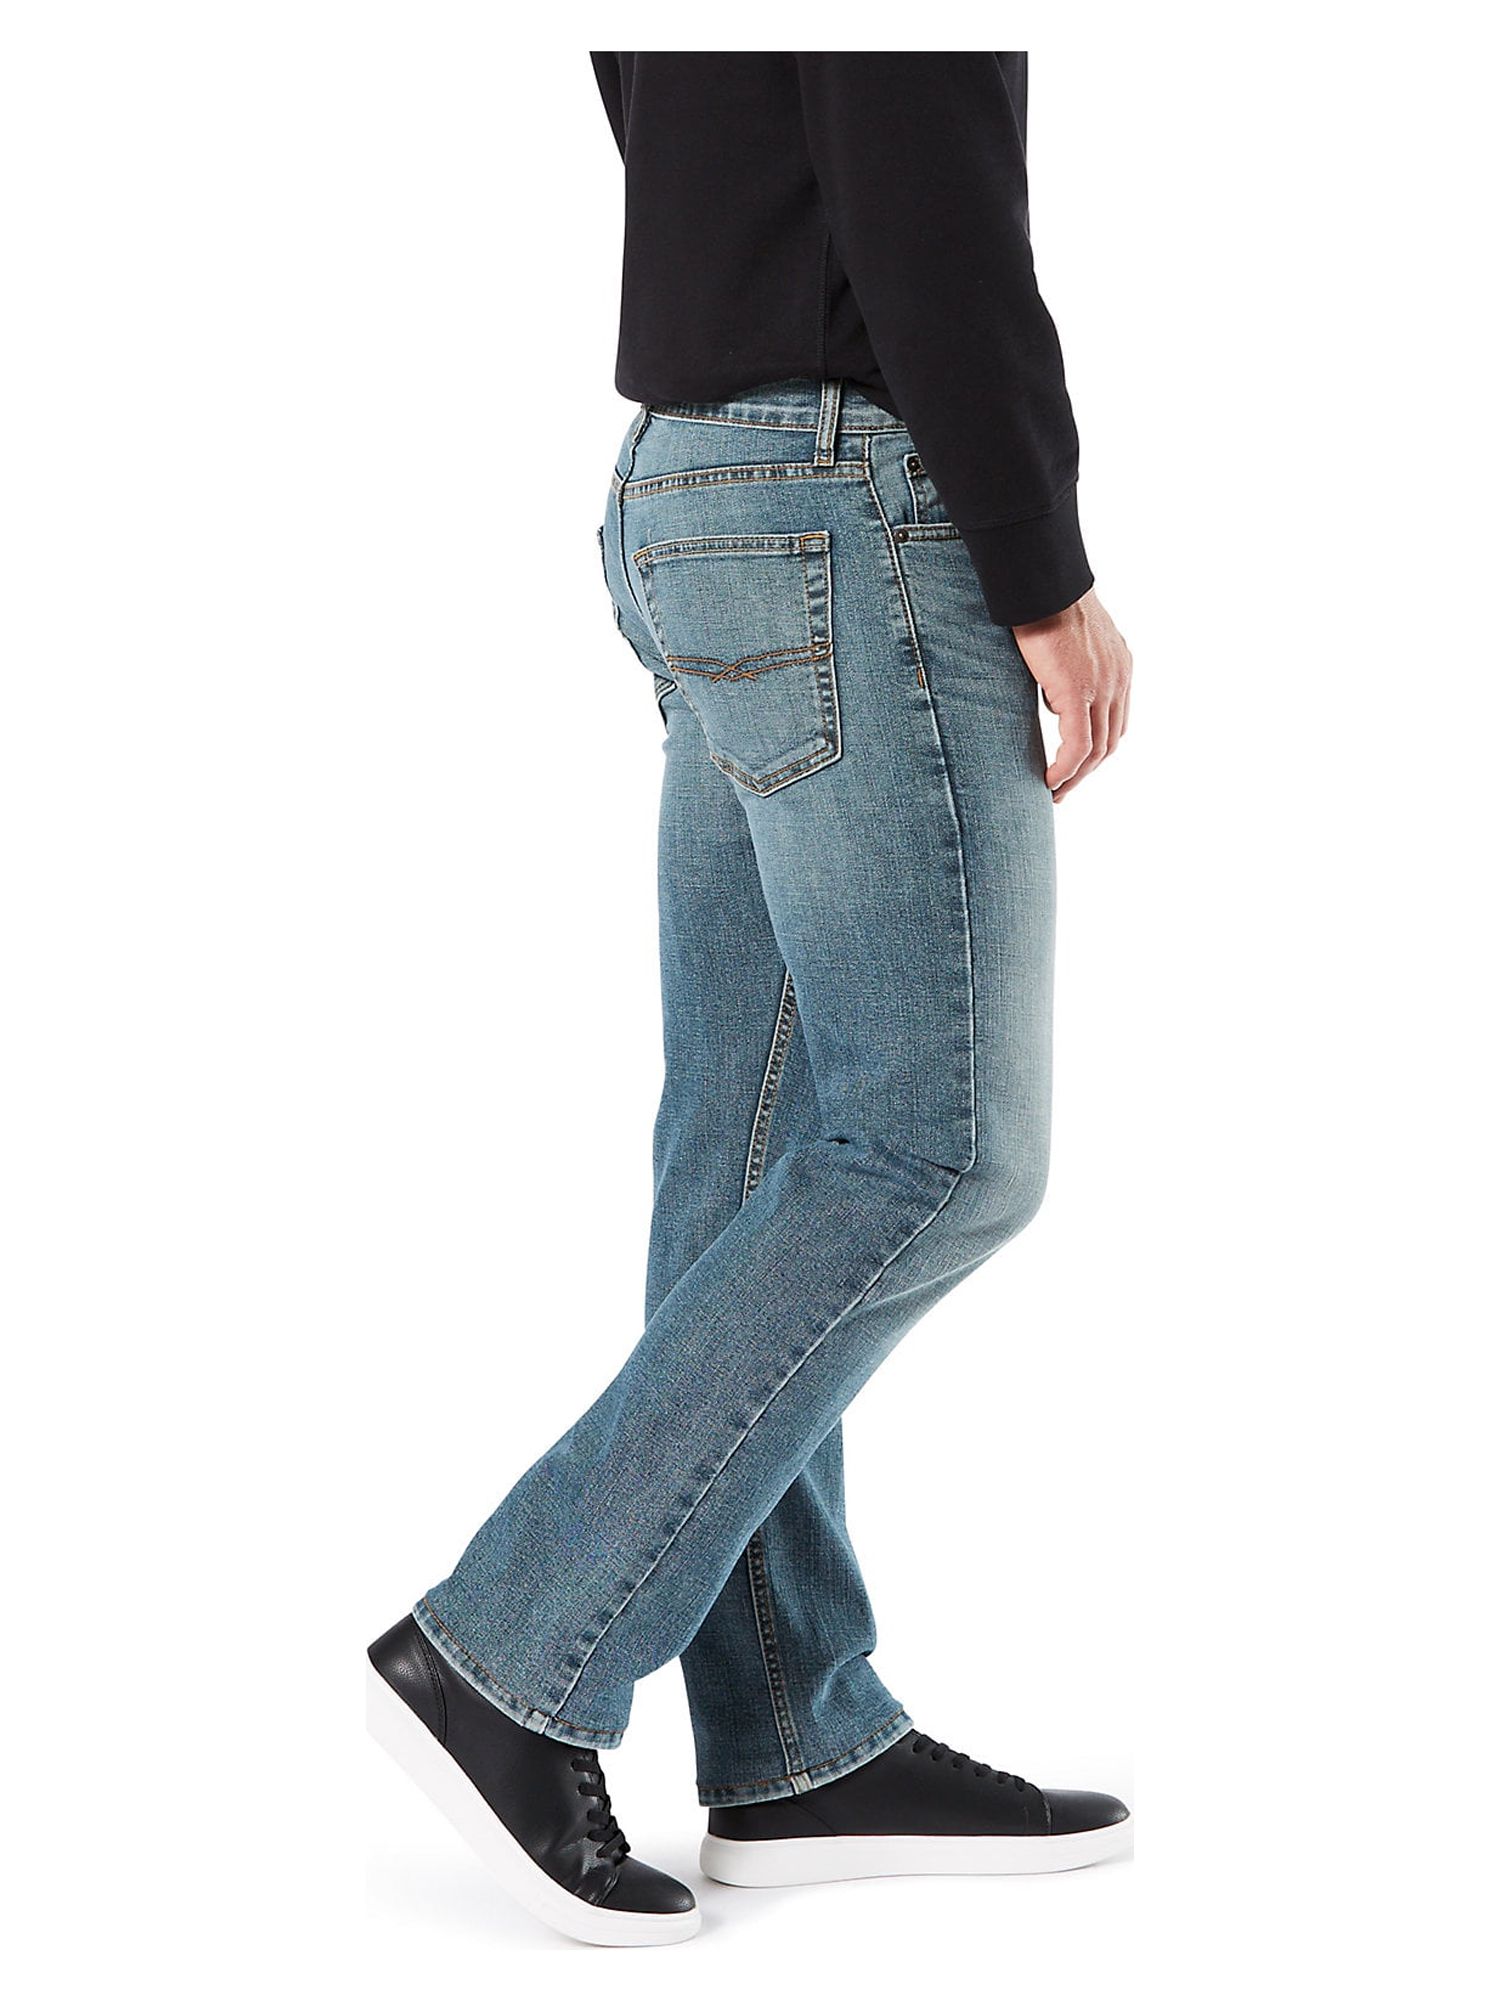 Signature by Levi Strauss & Co. Men's and Big and Tall Relaxed Fit Jeans - image 3 of 8